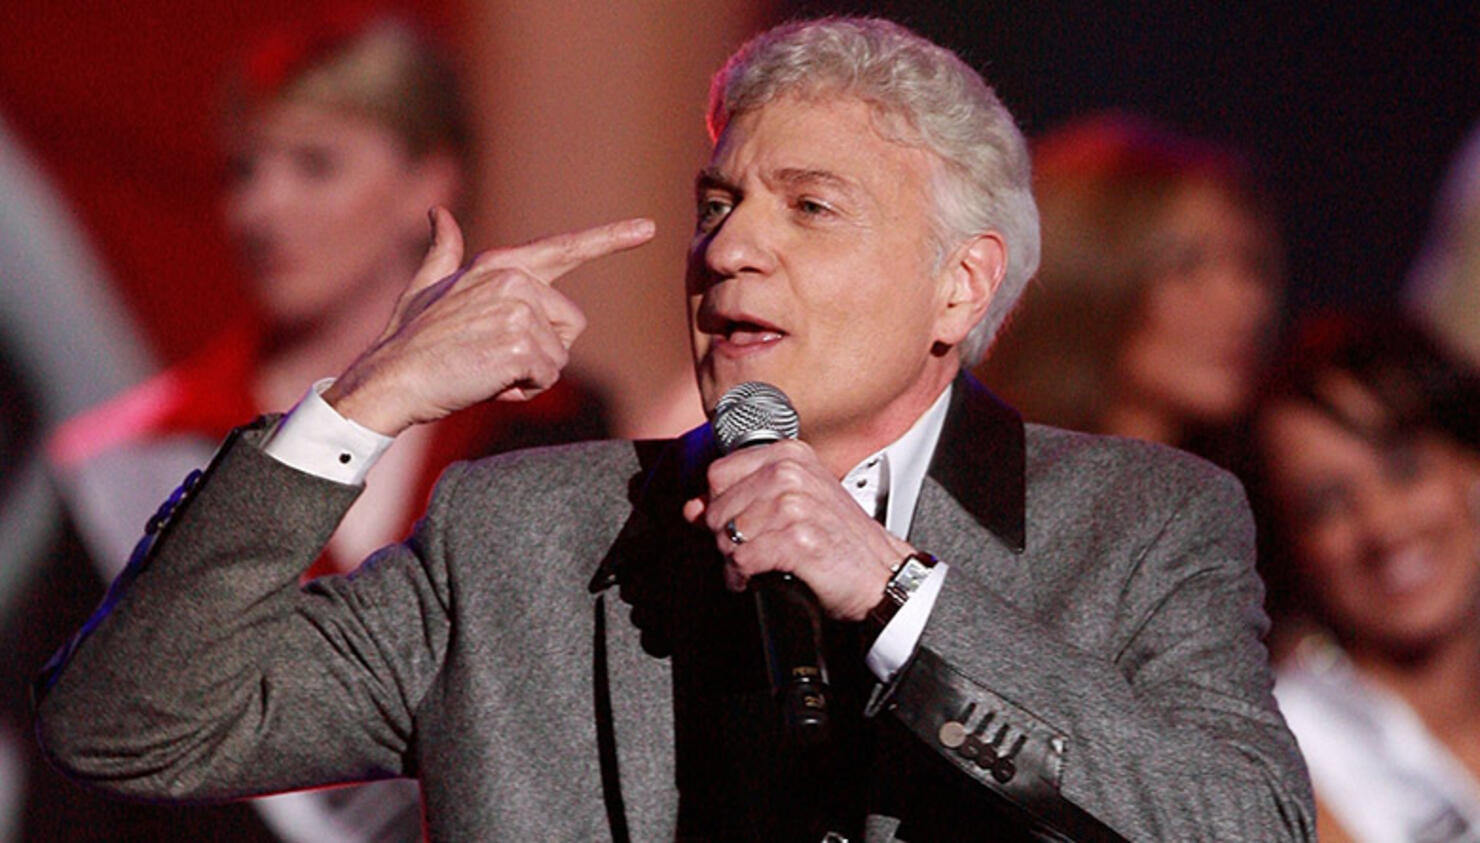 Dennis DeYoung Says Styx Hurt Legacy By Kicking Him Out, Shunning "Mr. Roboto"